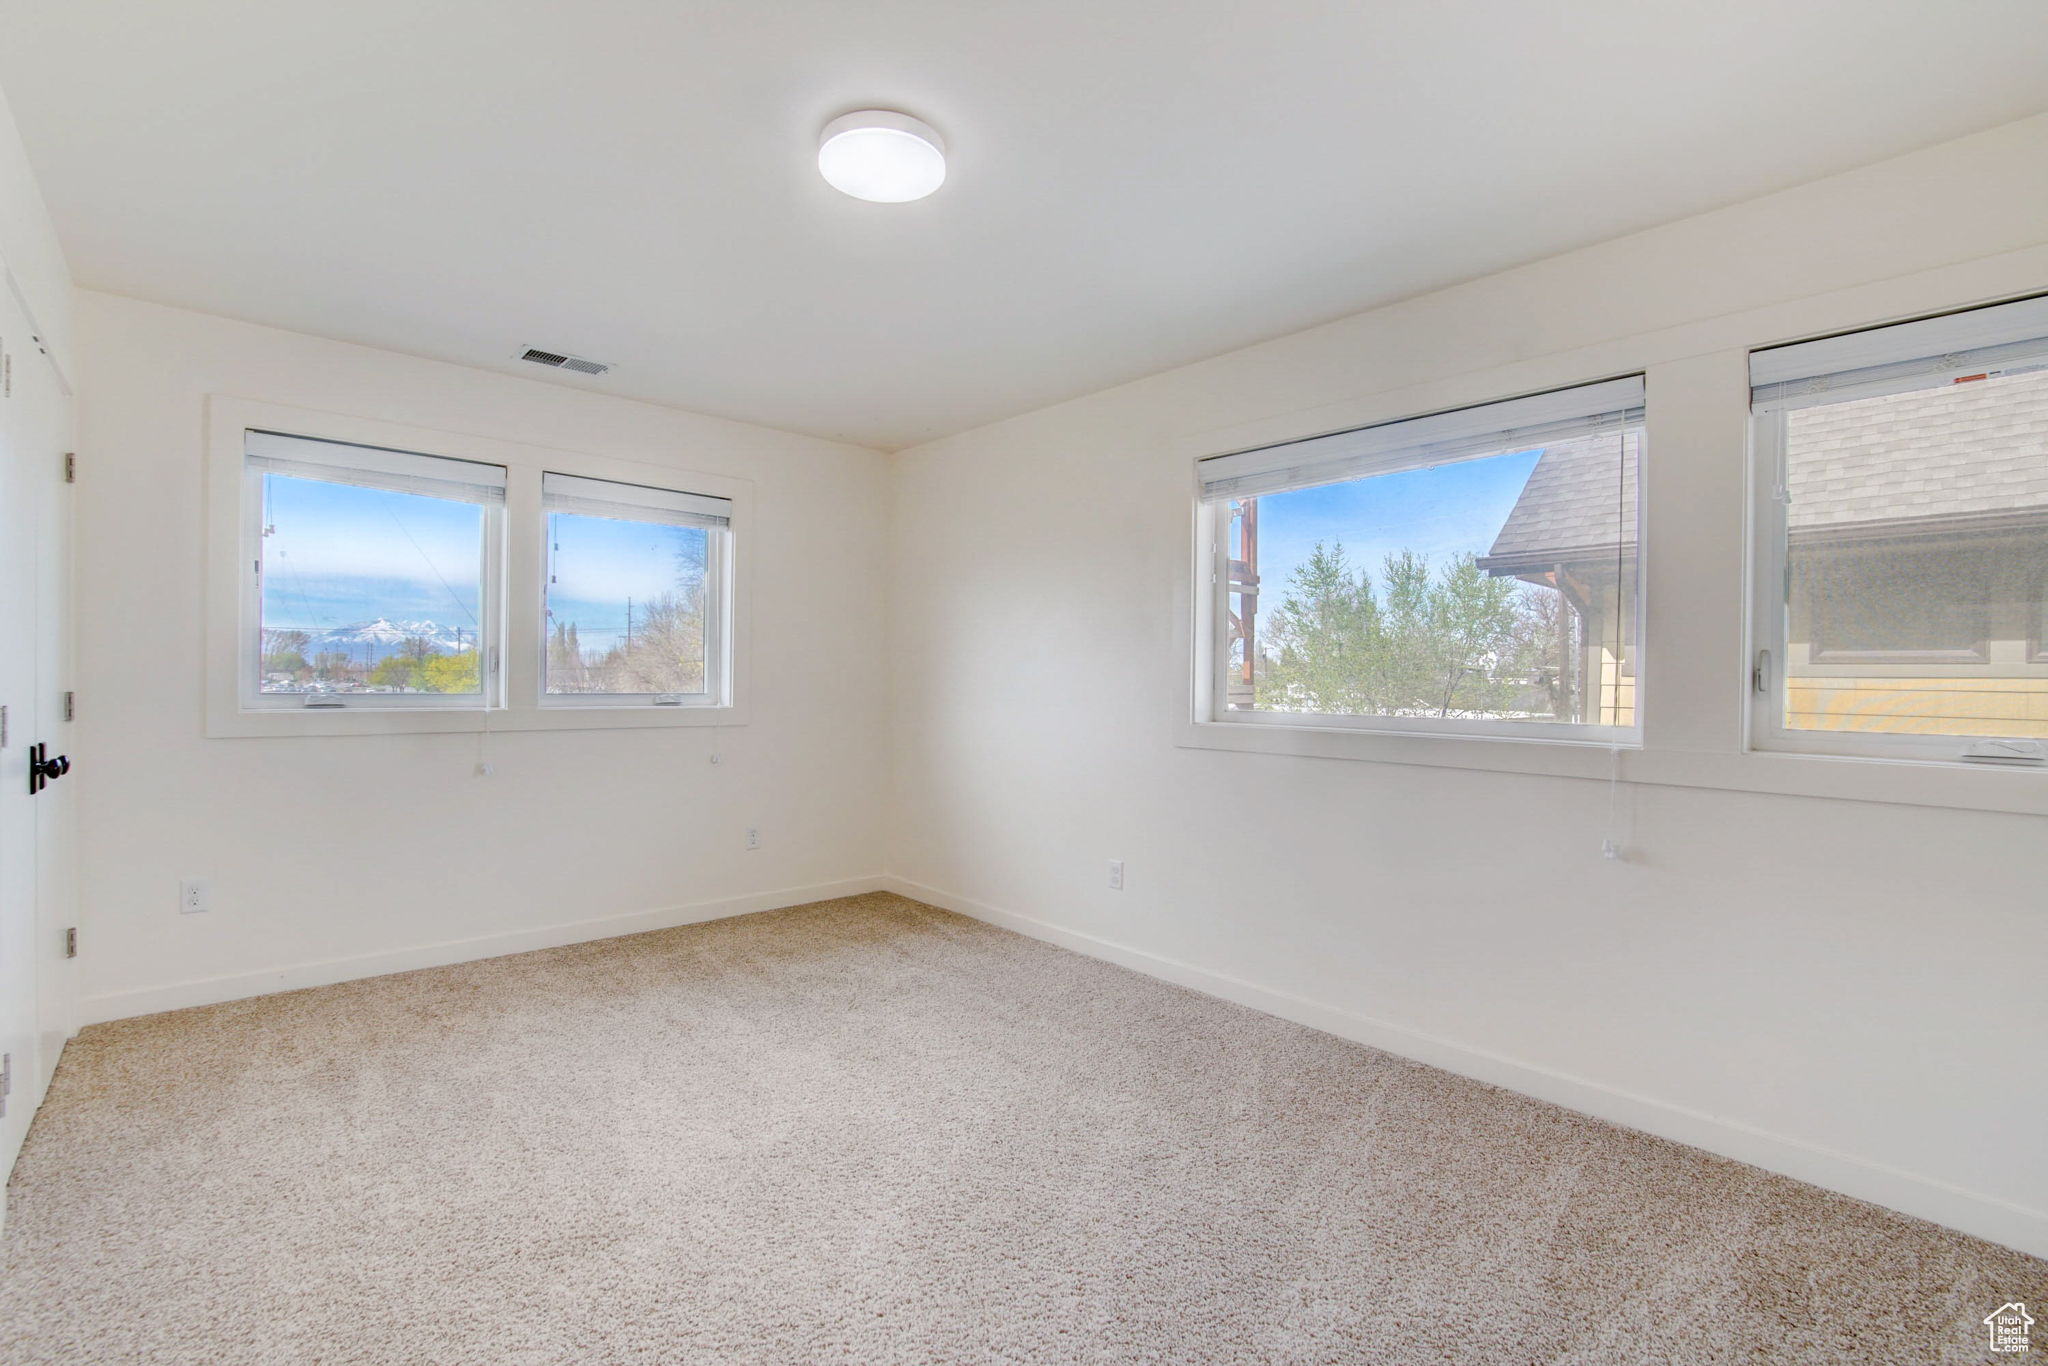 Empty room with a healthy amount of sunlight and carpet flooring